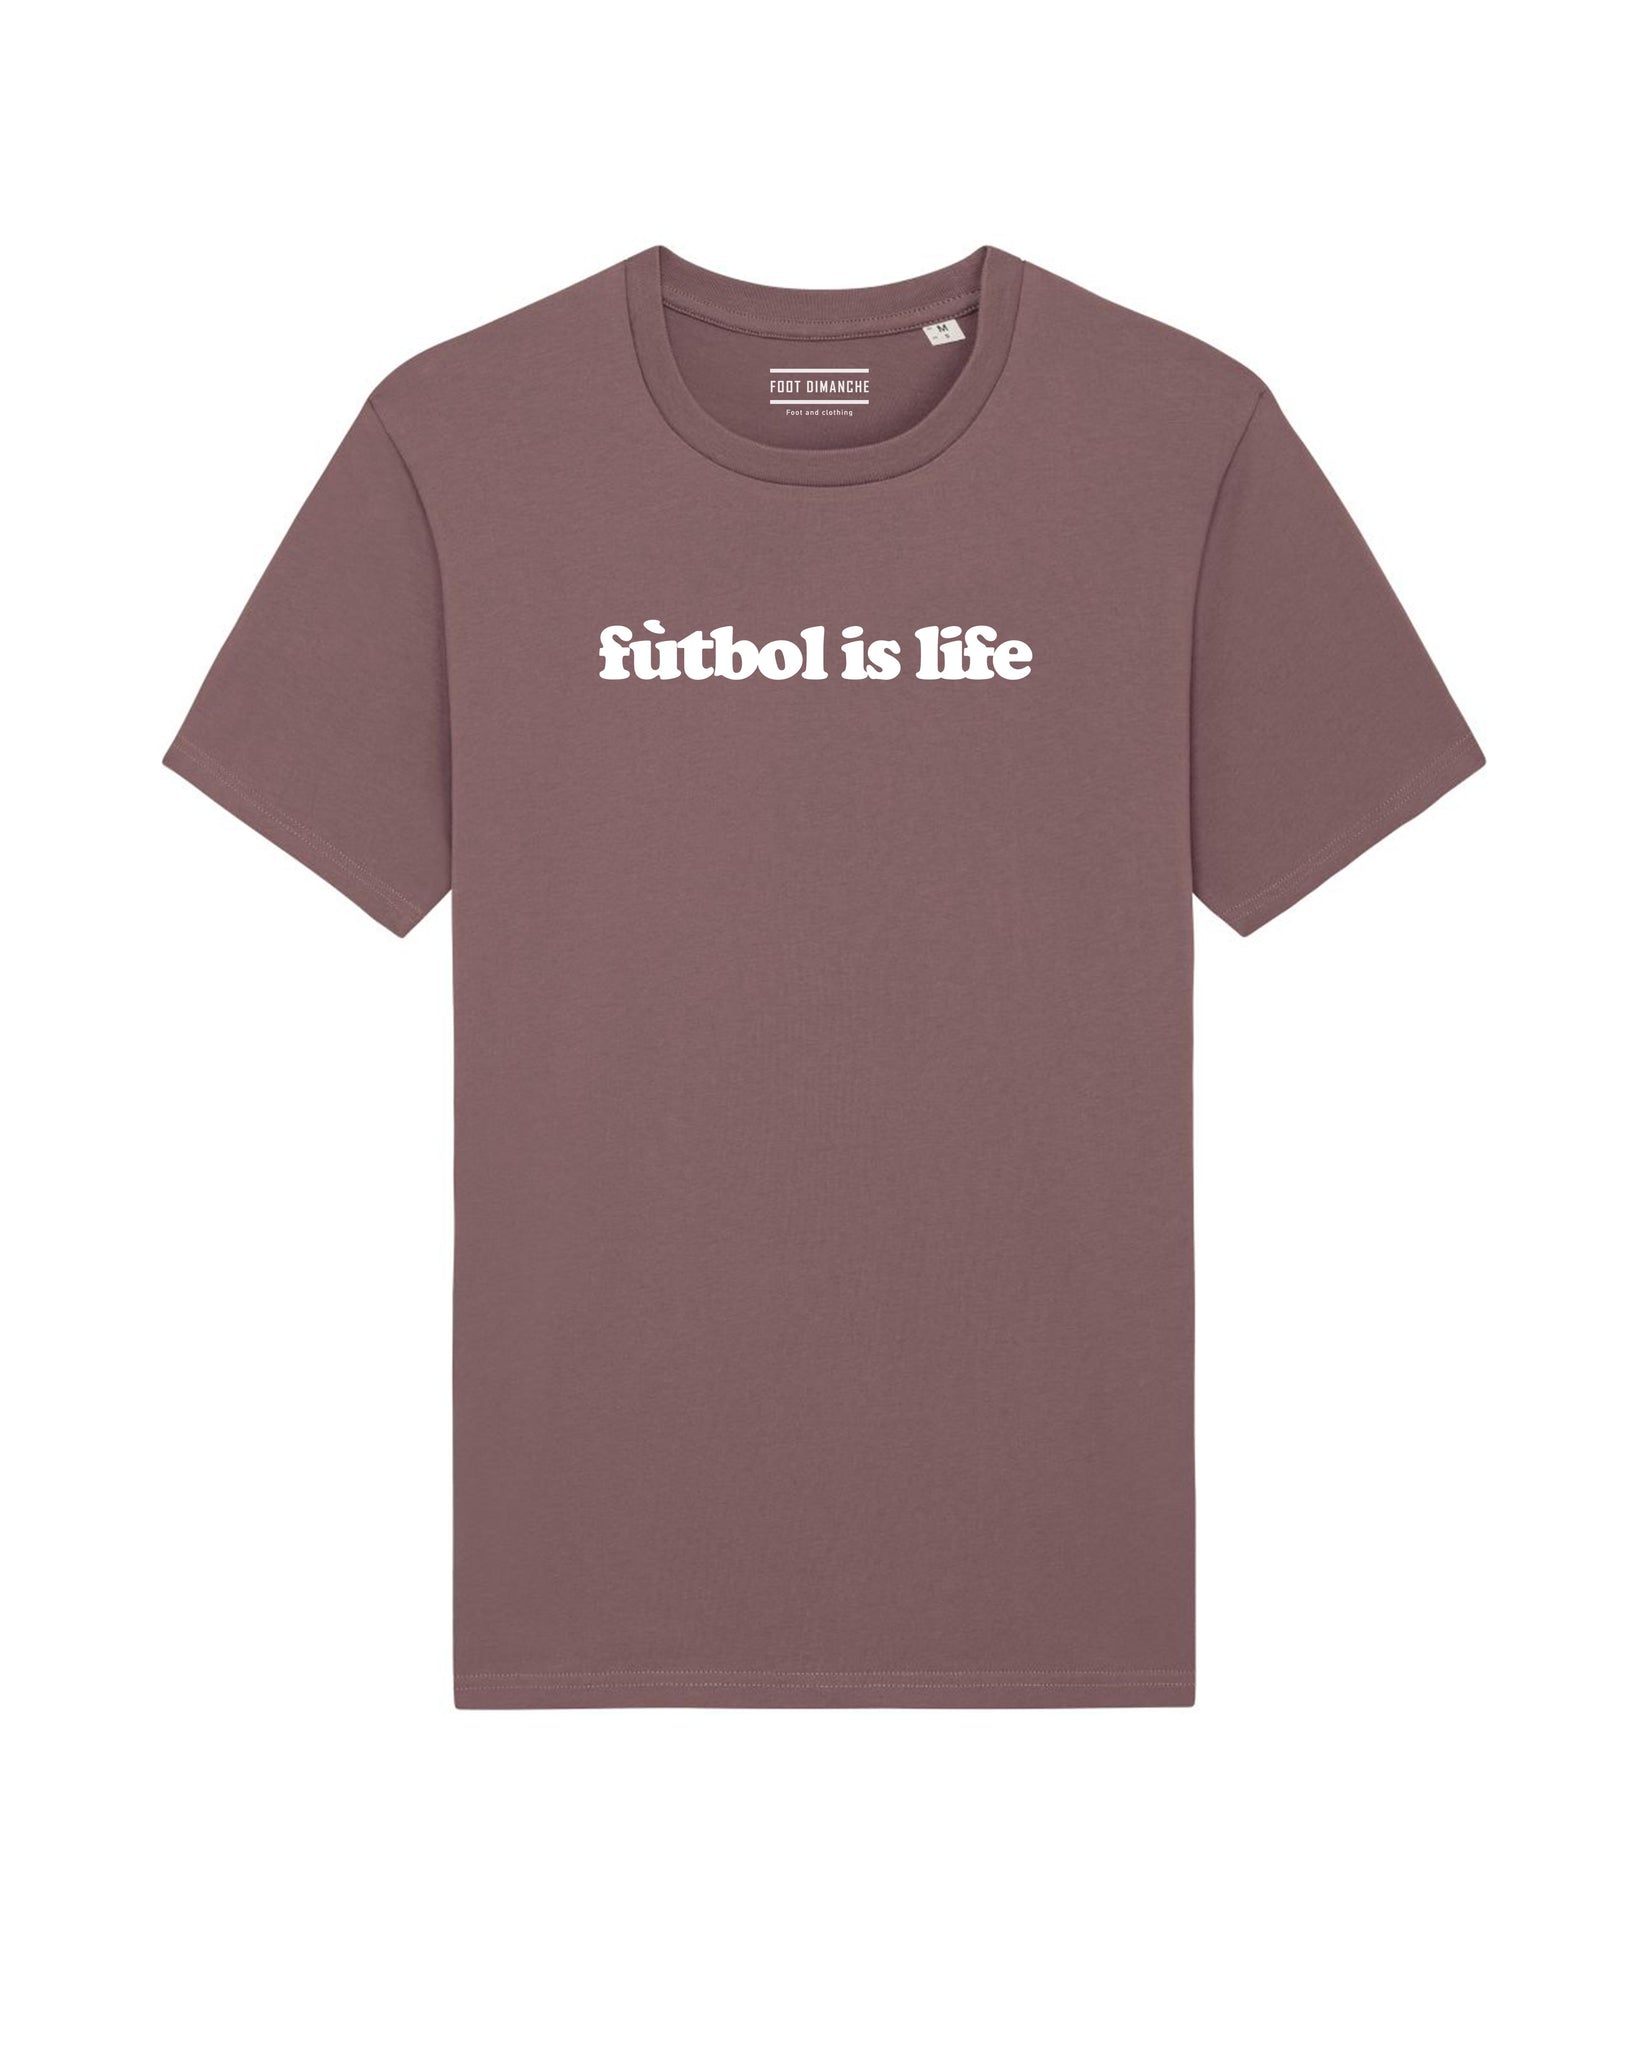 Tee Shirt fútbol is life Ted Lasso - Foot Dimanche